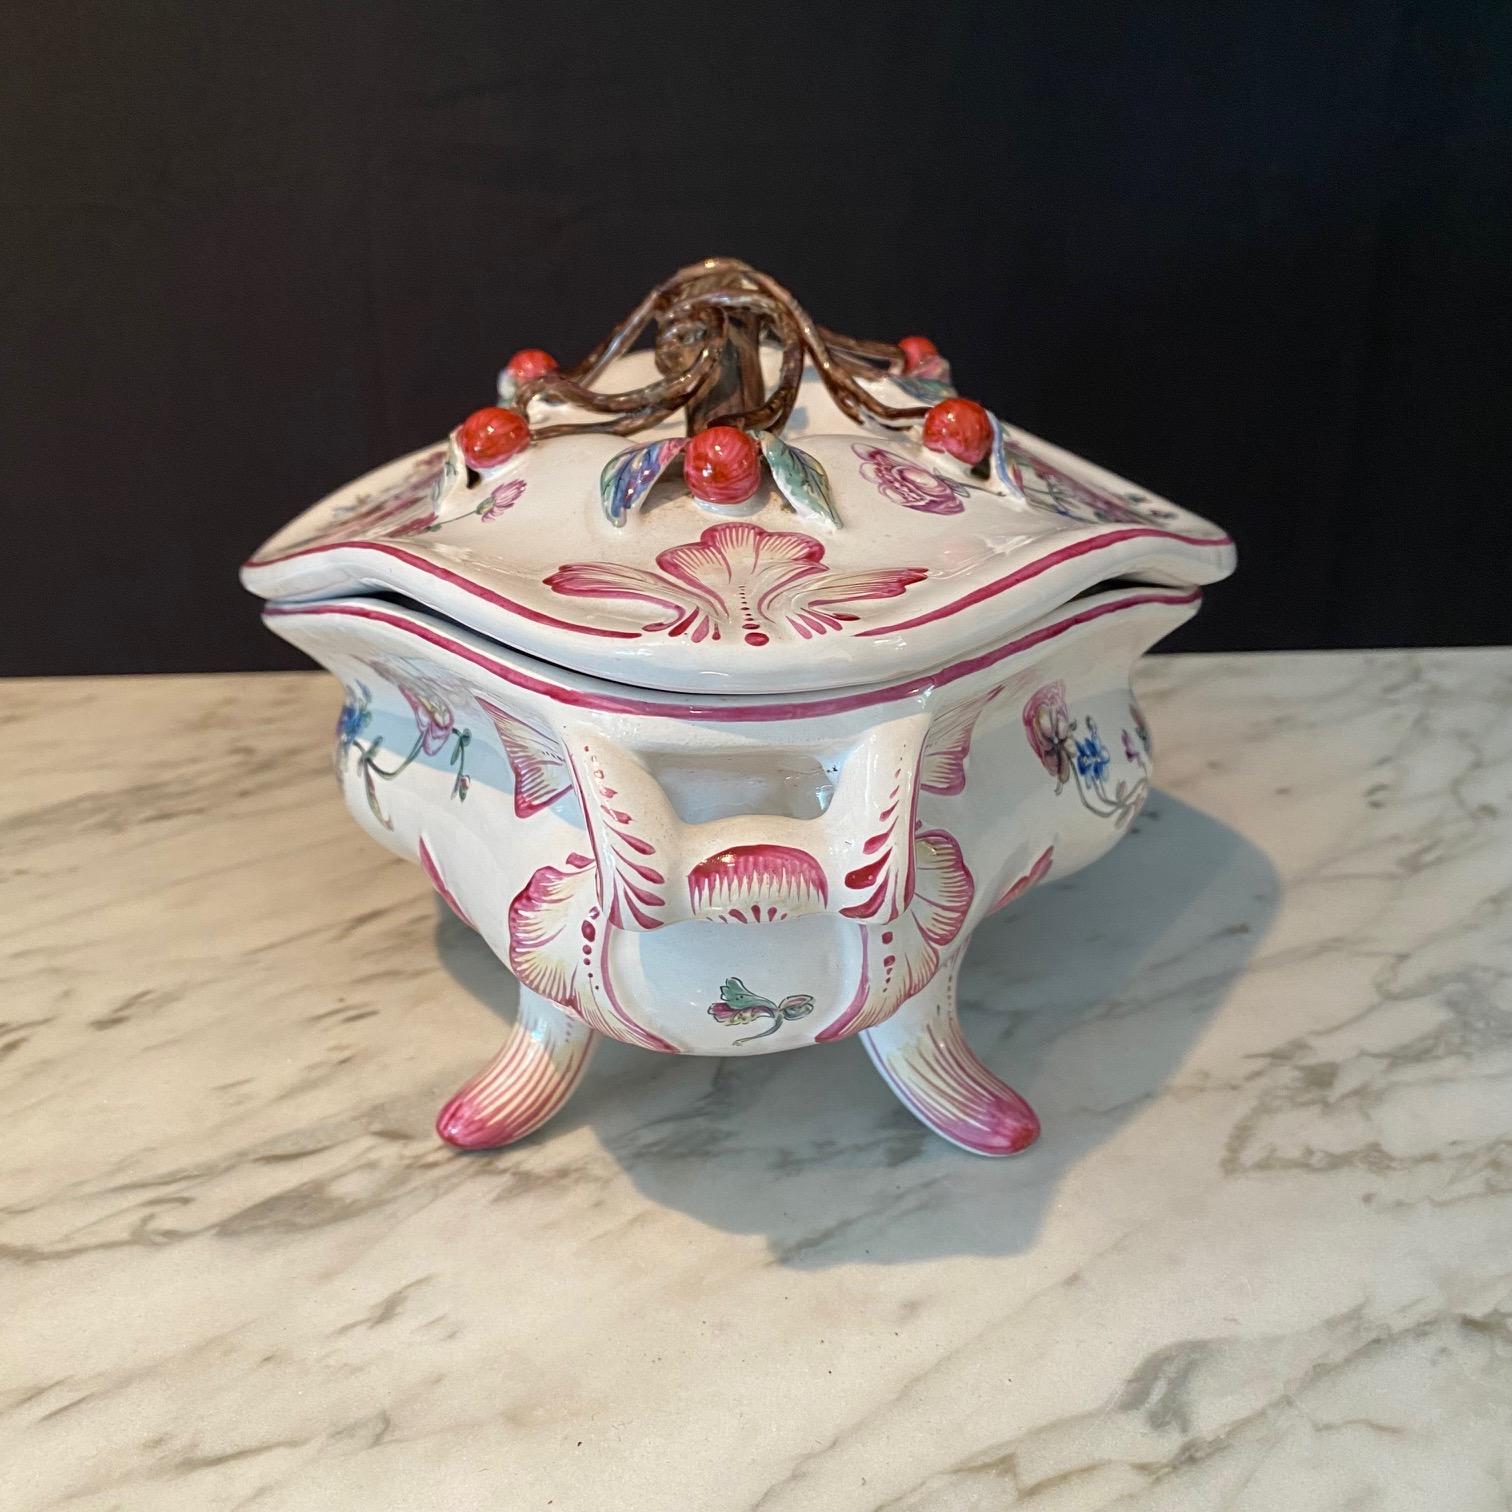 French Porcelain Barbotine Faience Majolica Jardiniere or Tureen and Platter  For Sale 4